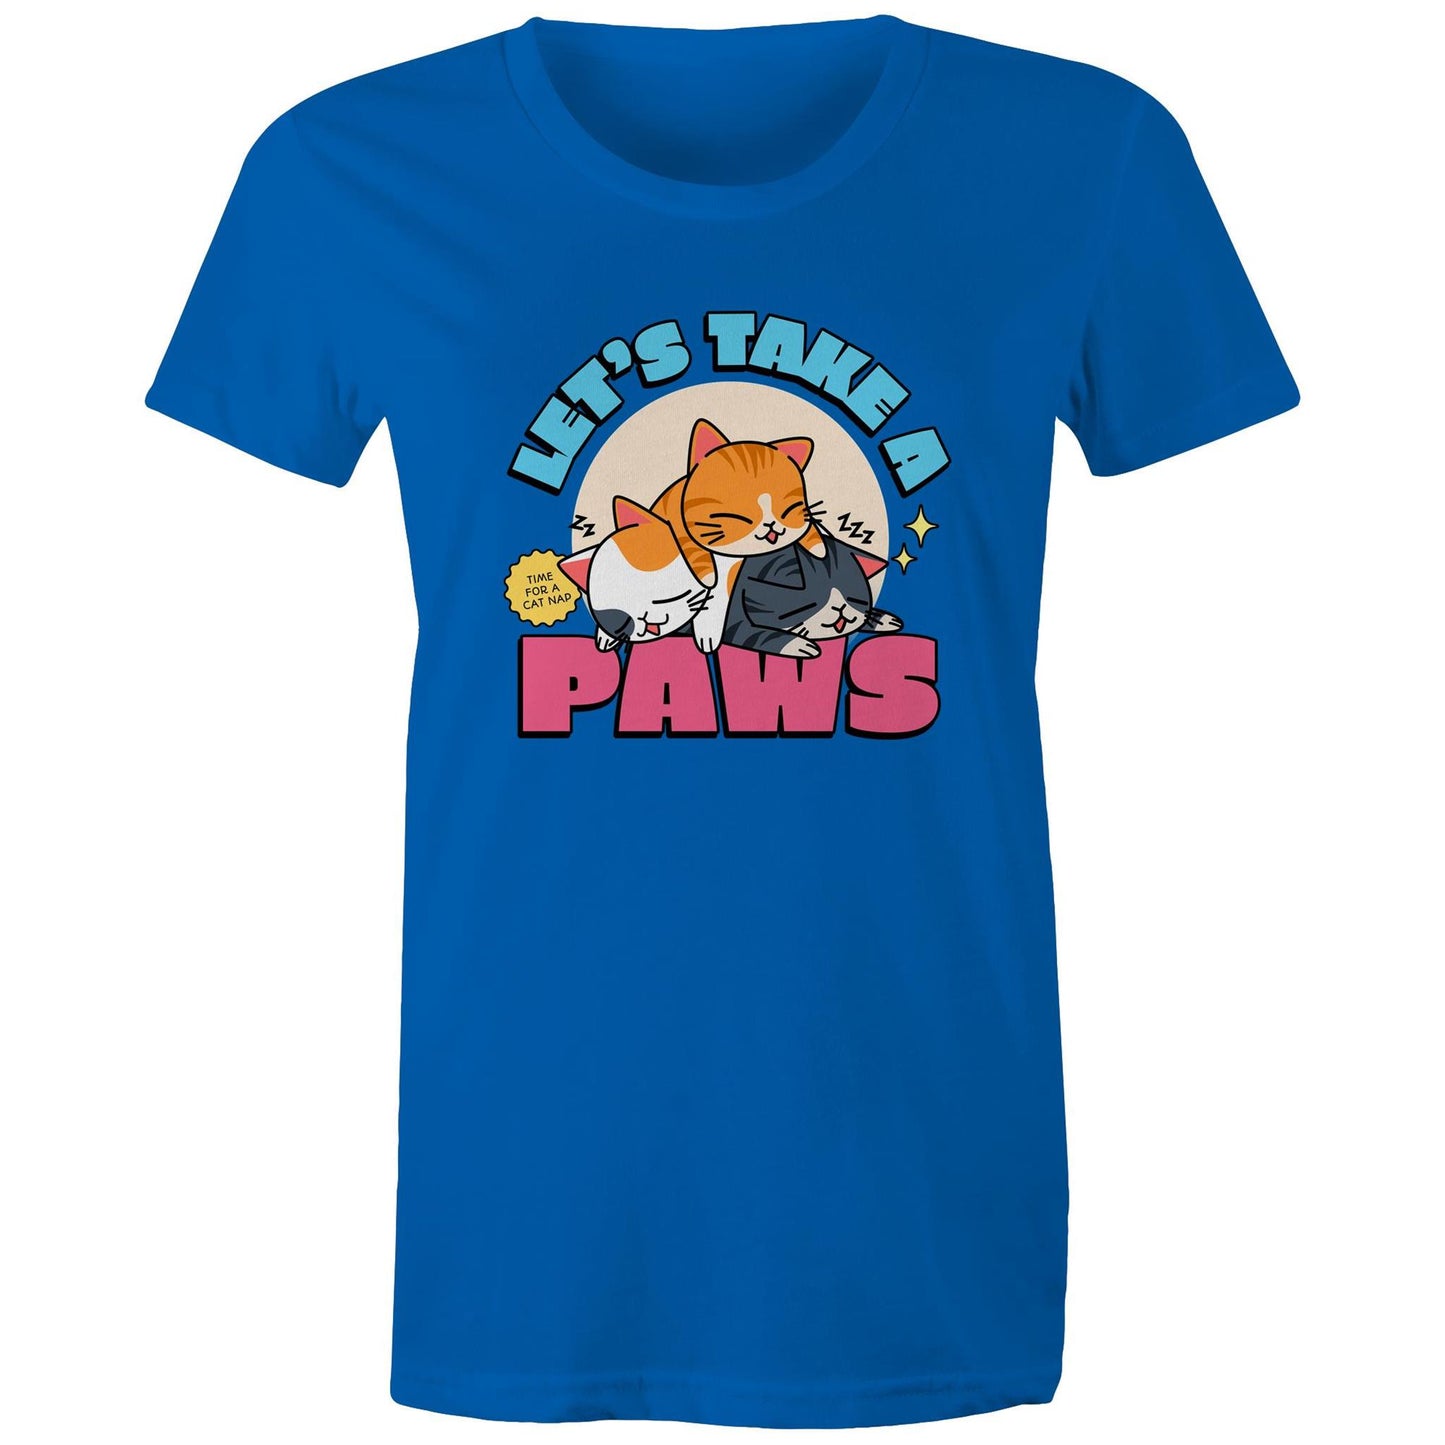 Let's Take A Paws, Time For A Cat Nap - Womens T-shirt Bright Royal Womens T-shirt animal